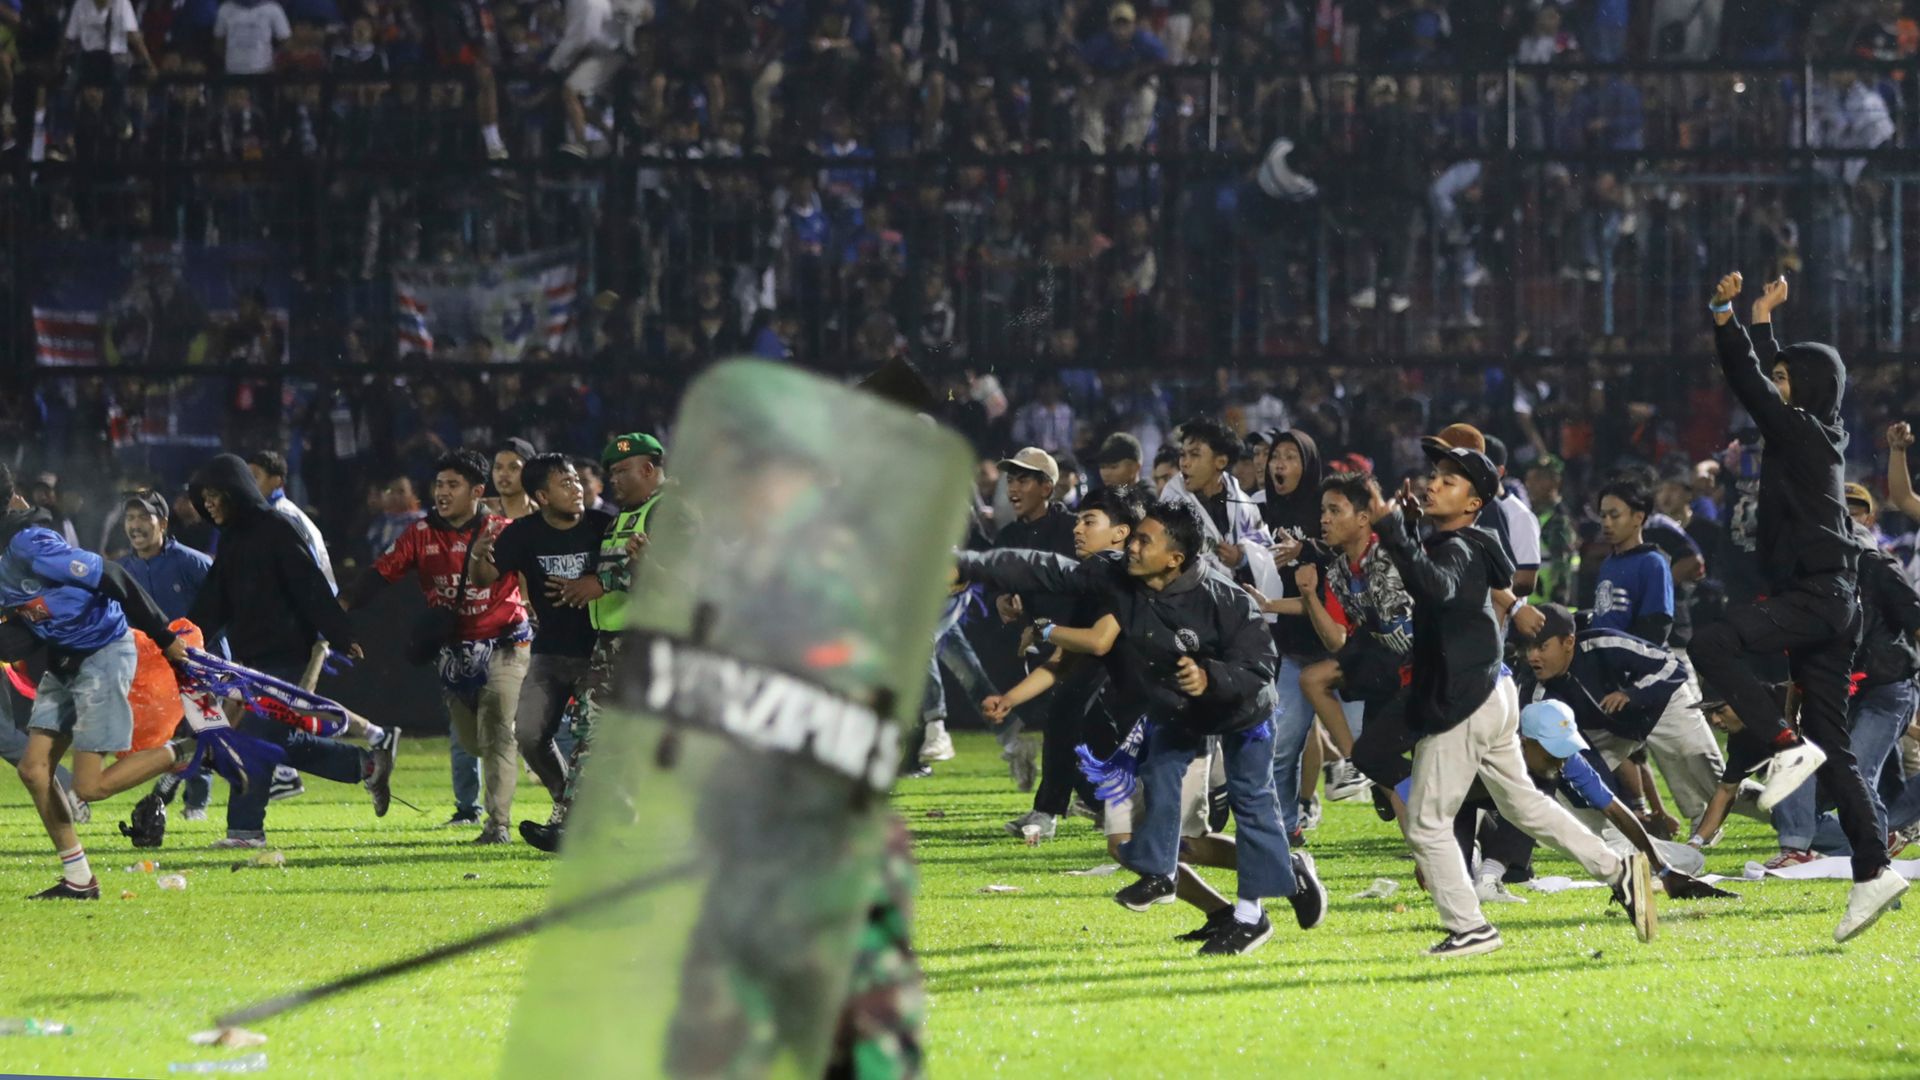 Indonesian FA: Delays in unlocking gates contributed to 125 deaths